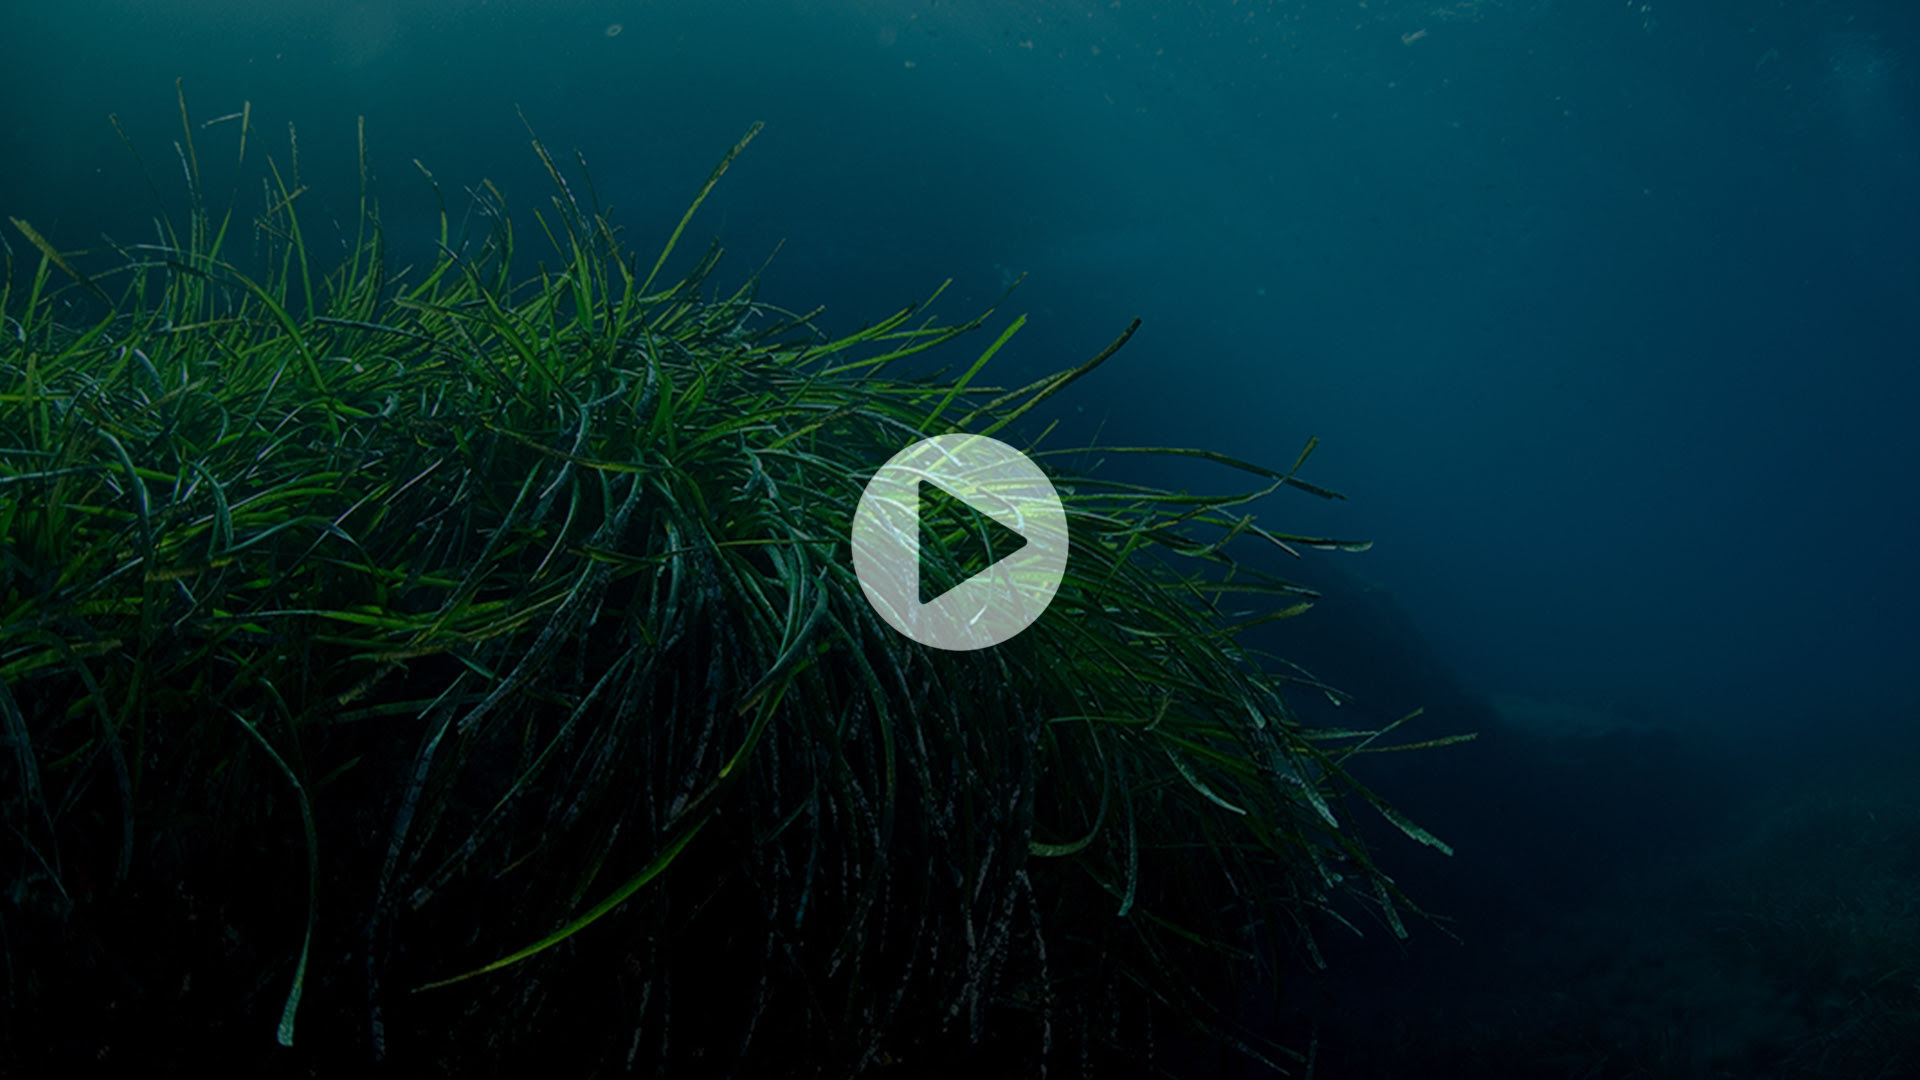 Green seaweed takes up bottom half of photo, blue sea in background, play button in center.